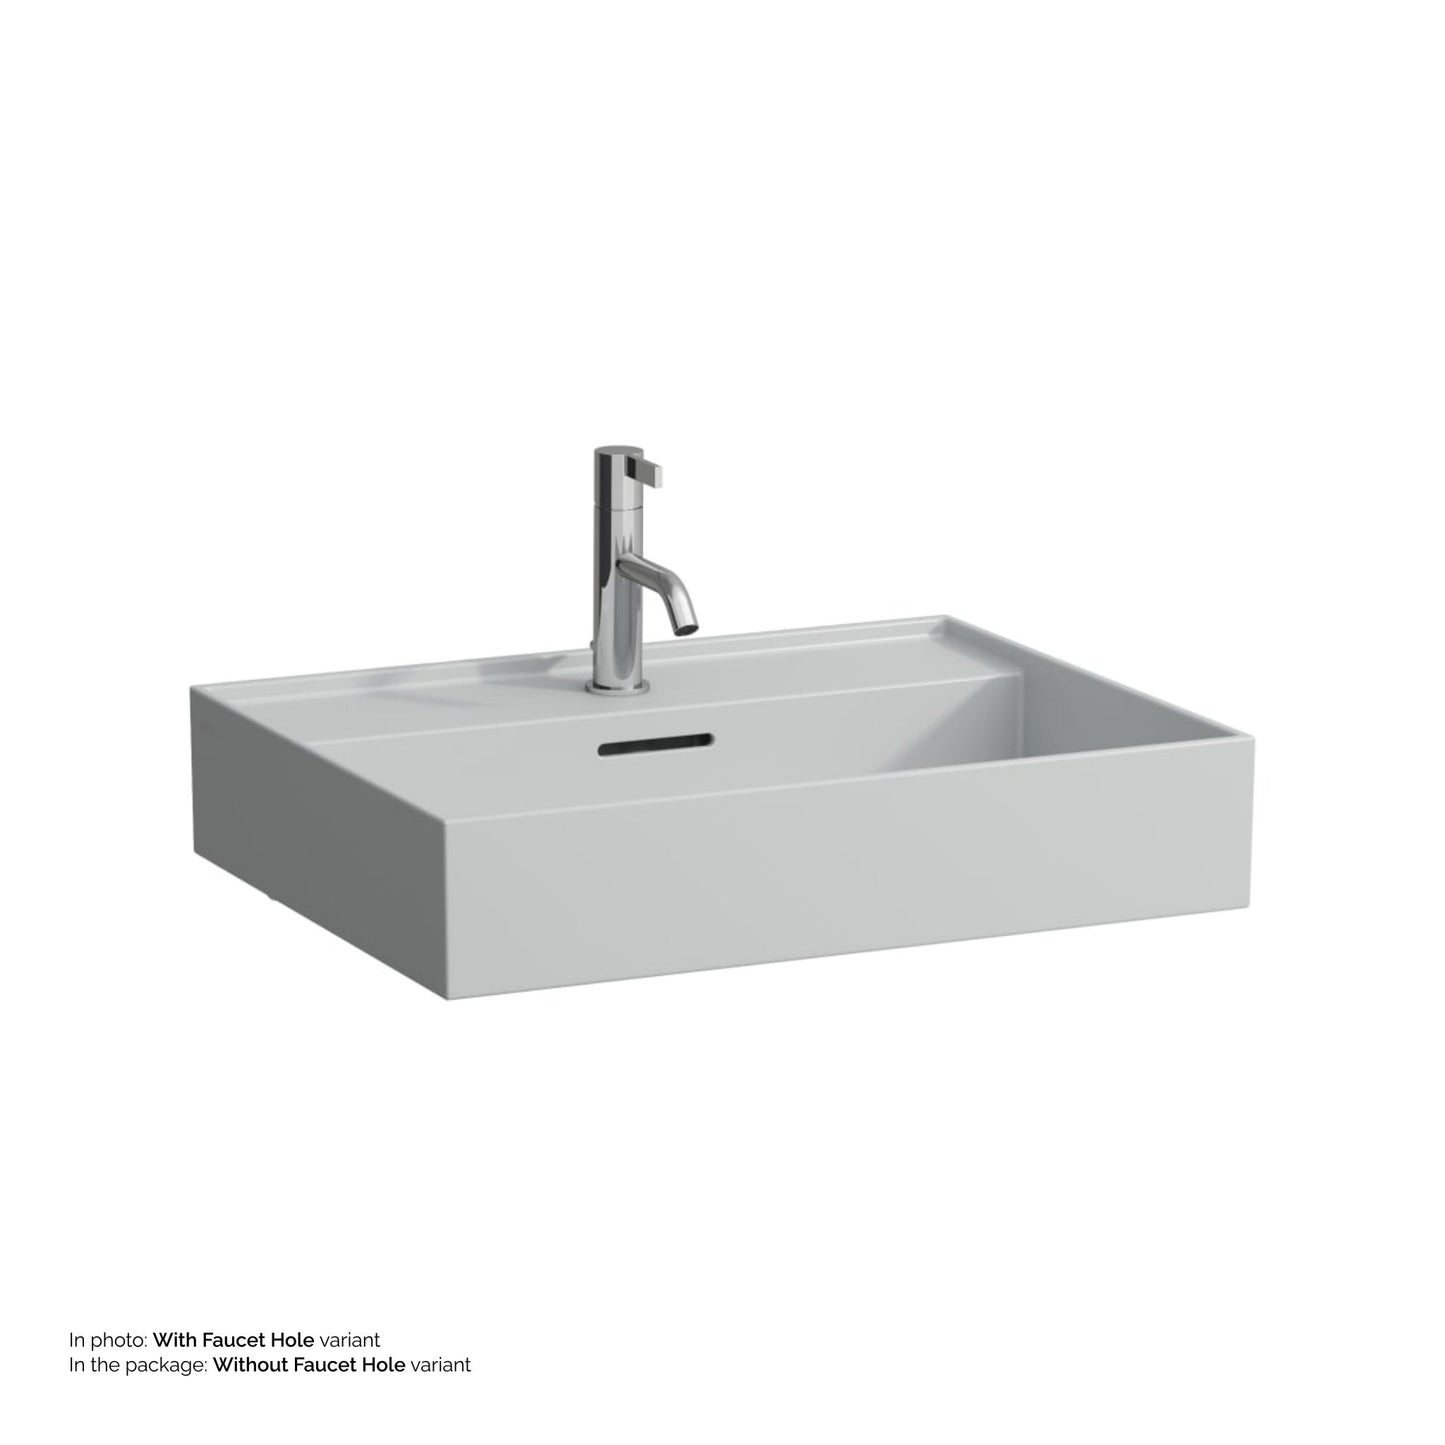 Laufen Kartell 24" x 18" Matte Gray Countertop Bathroom Sink Without Faucet Hole